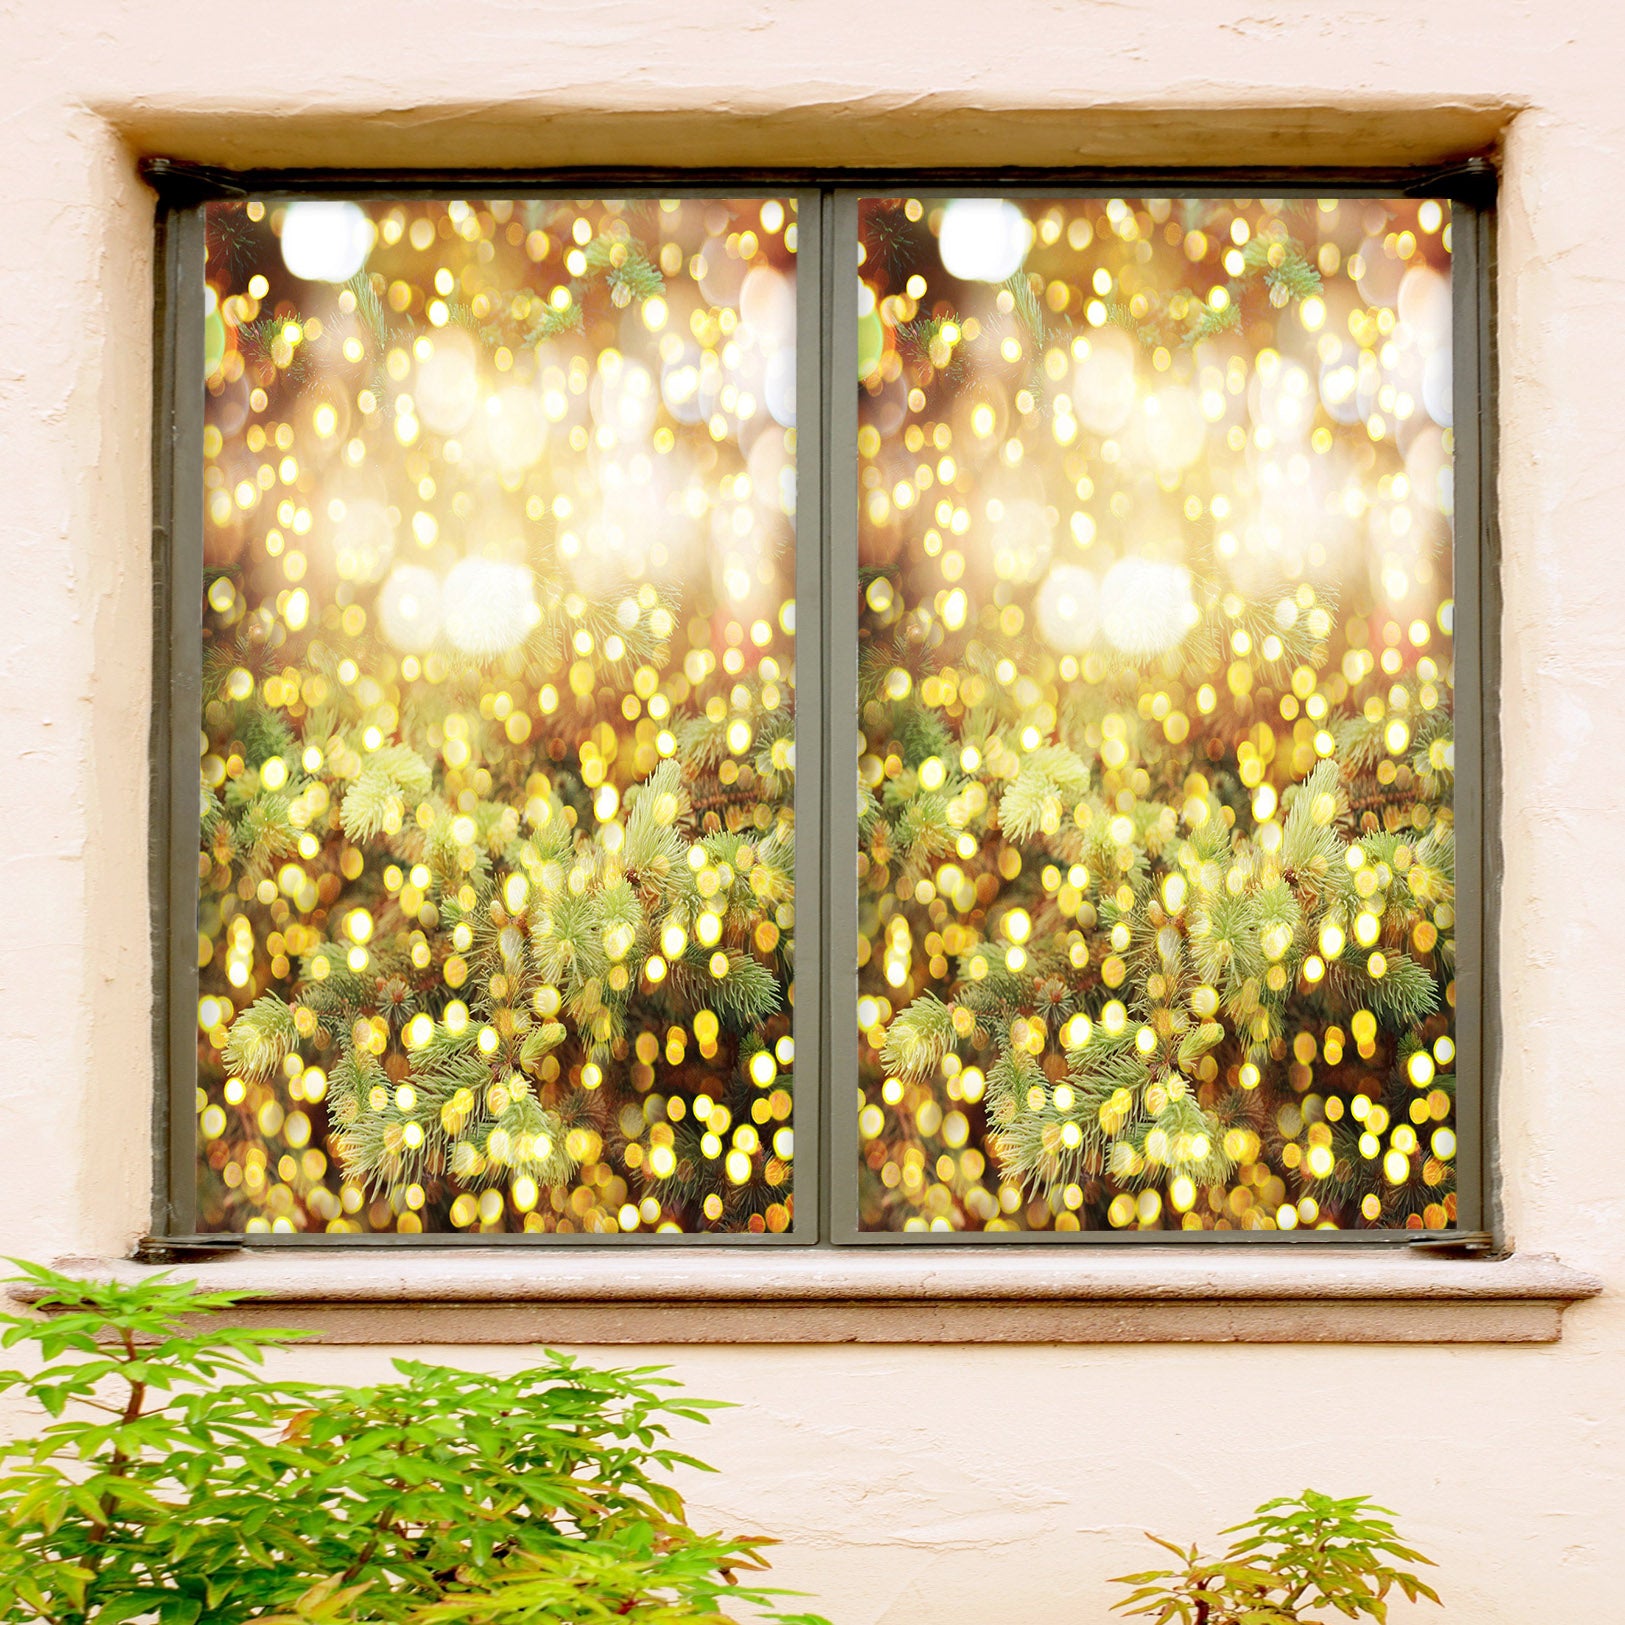 3D Light 42178 Christmas Window Film Print Sticker Cling Stained Glass Xmas